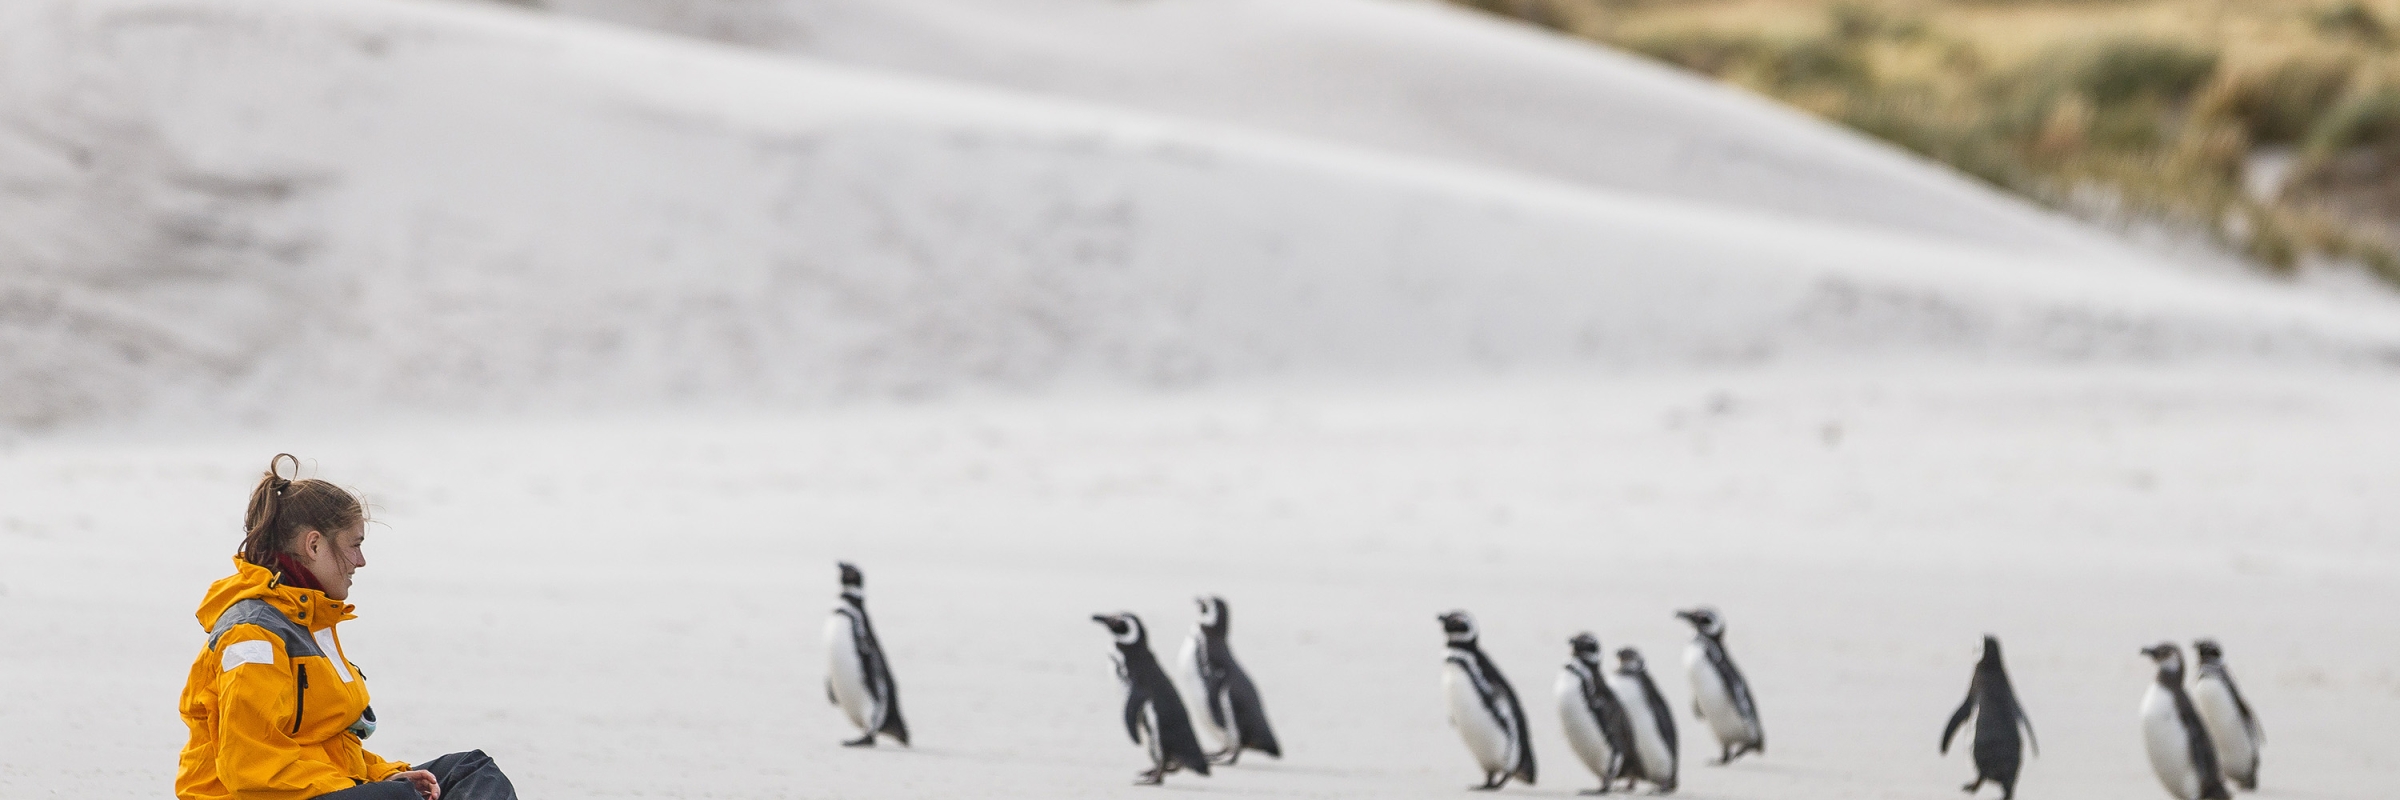 A guest watches Magellanic penguins return from sea, in the Falkland Islands. Photo by Nicky Souness.